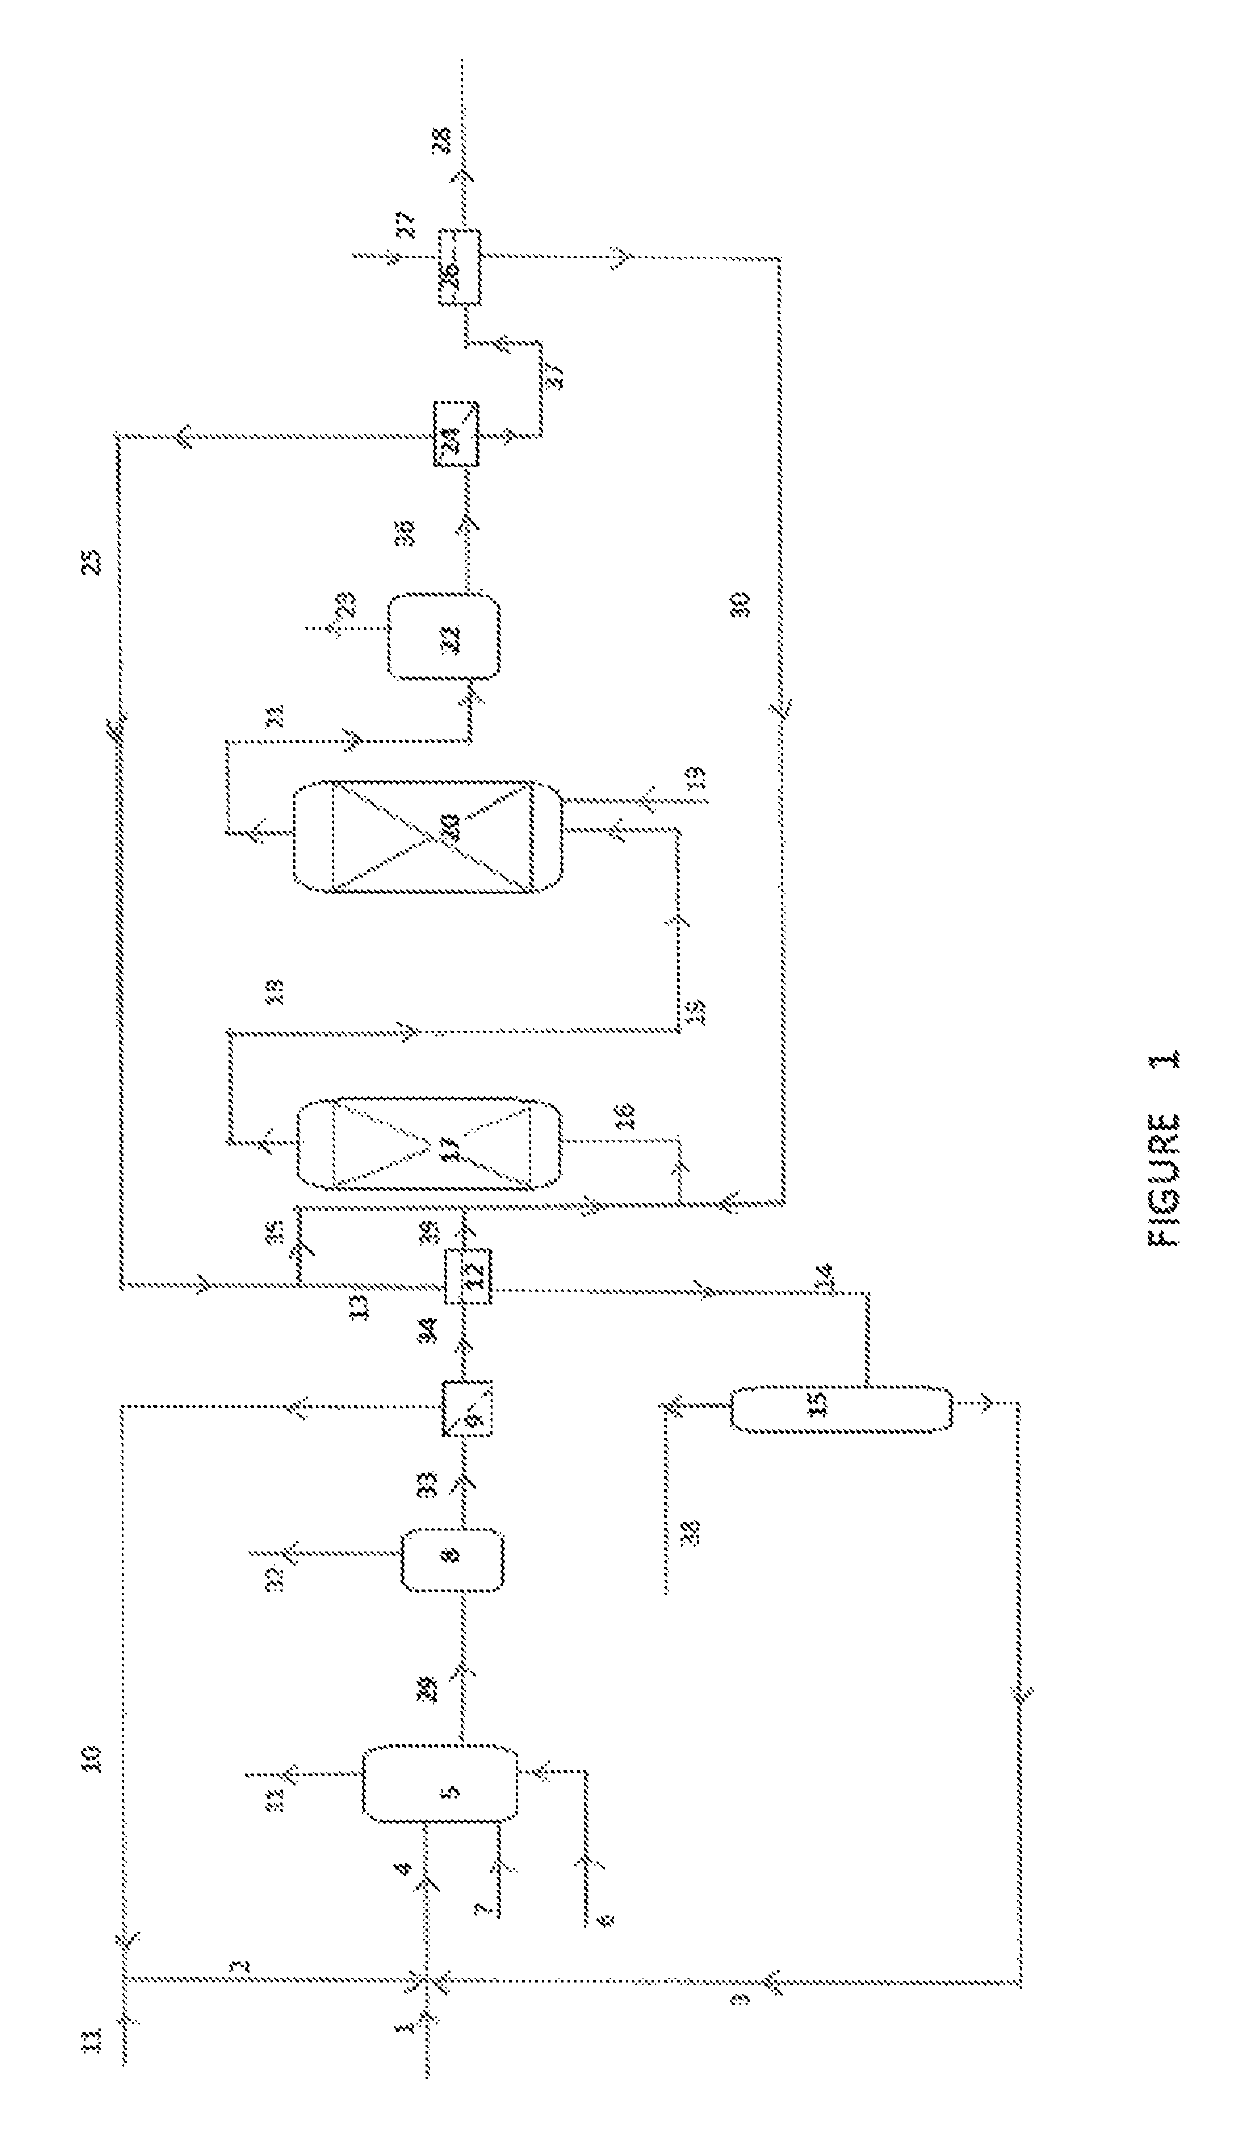 Process for the preparation of a purified acid composition